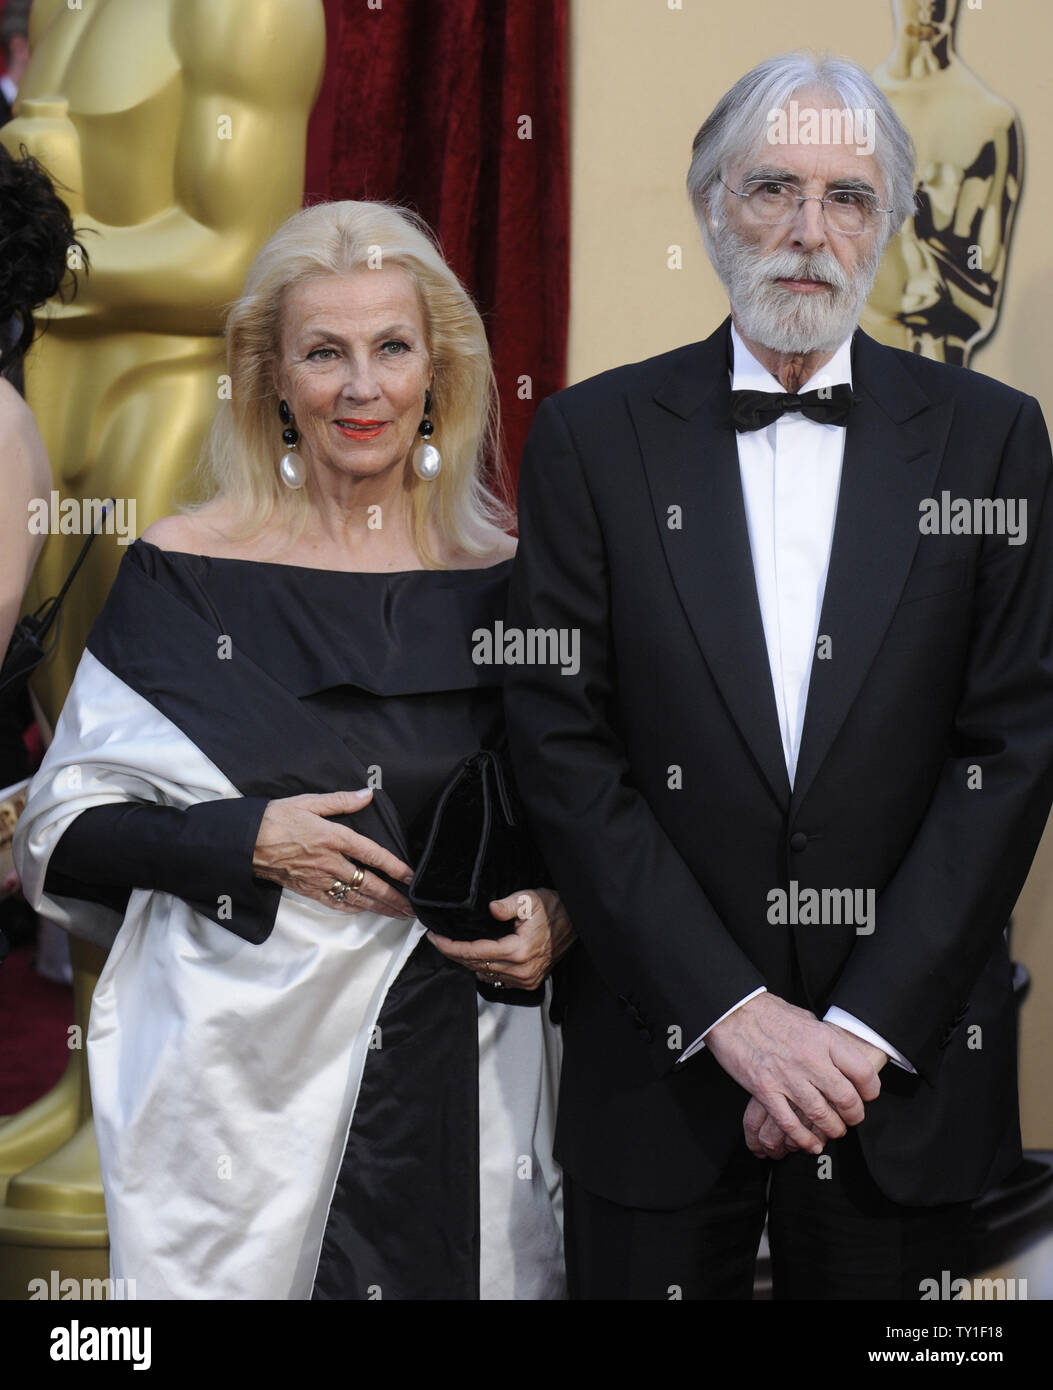 Director Michael Haneke and his wife Susanne arrive on the red carpet at the 82nd Academy Awards in Hollywood on March 7, 2010.   UPI/Phil McCarten Stock Photo